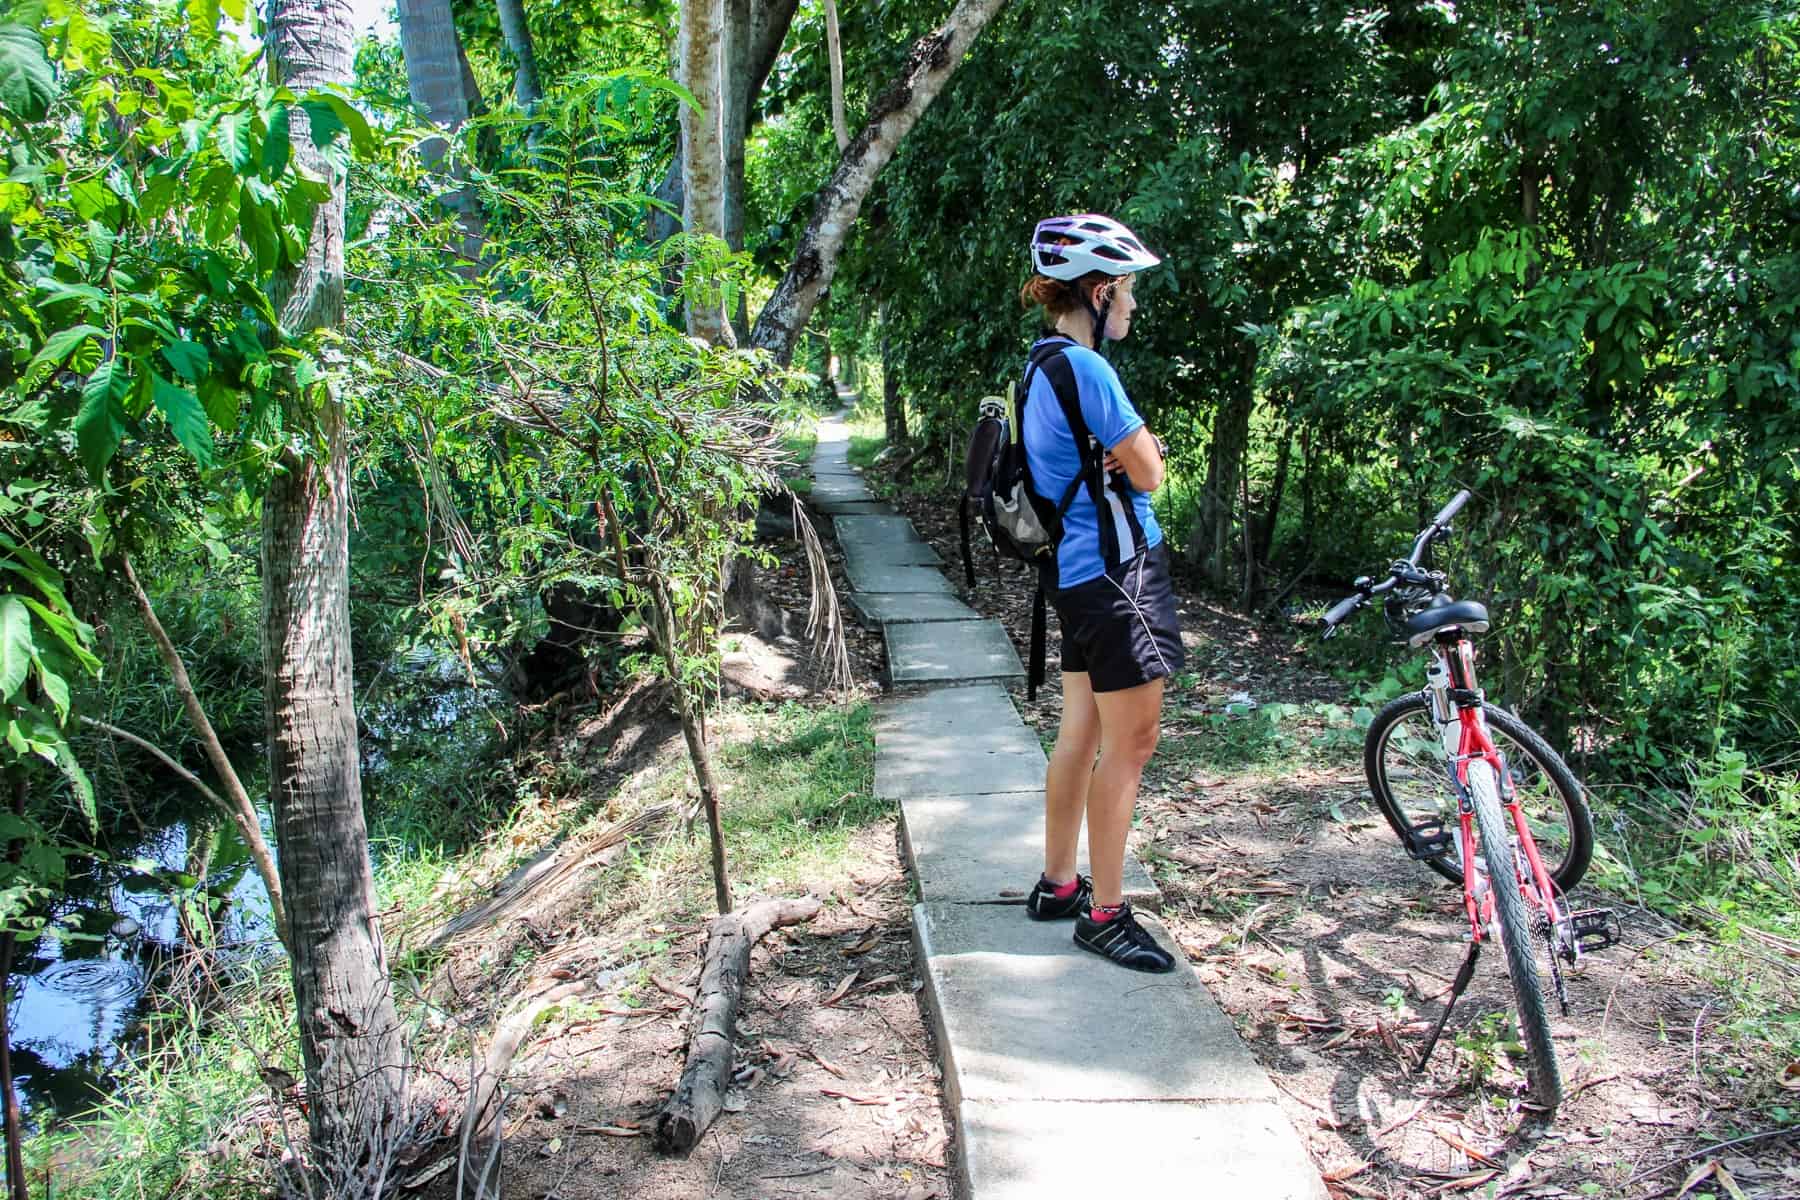 A woman in a blue t-shirt and black shorts takes a break from biking in the Bangkok countryside, taking shade on the pathway surrounding by green bushes